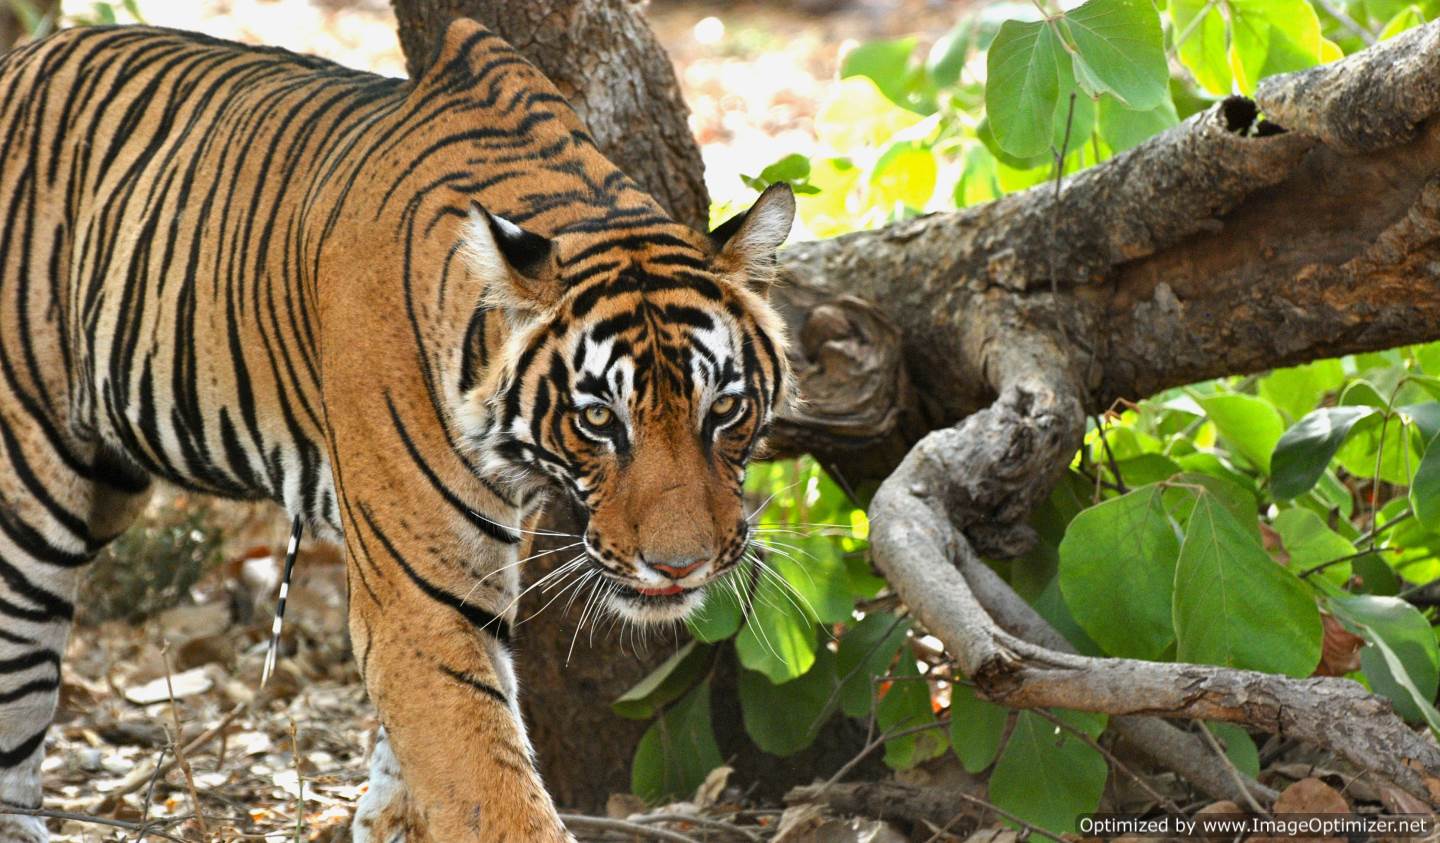 Golden Triangle Tour With Ranthambhore